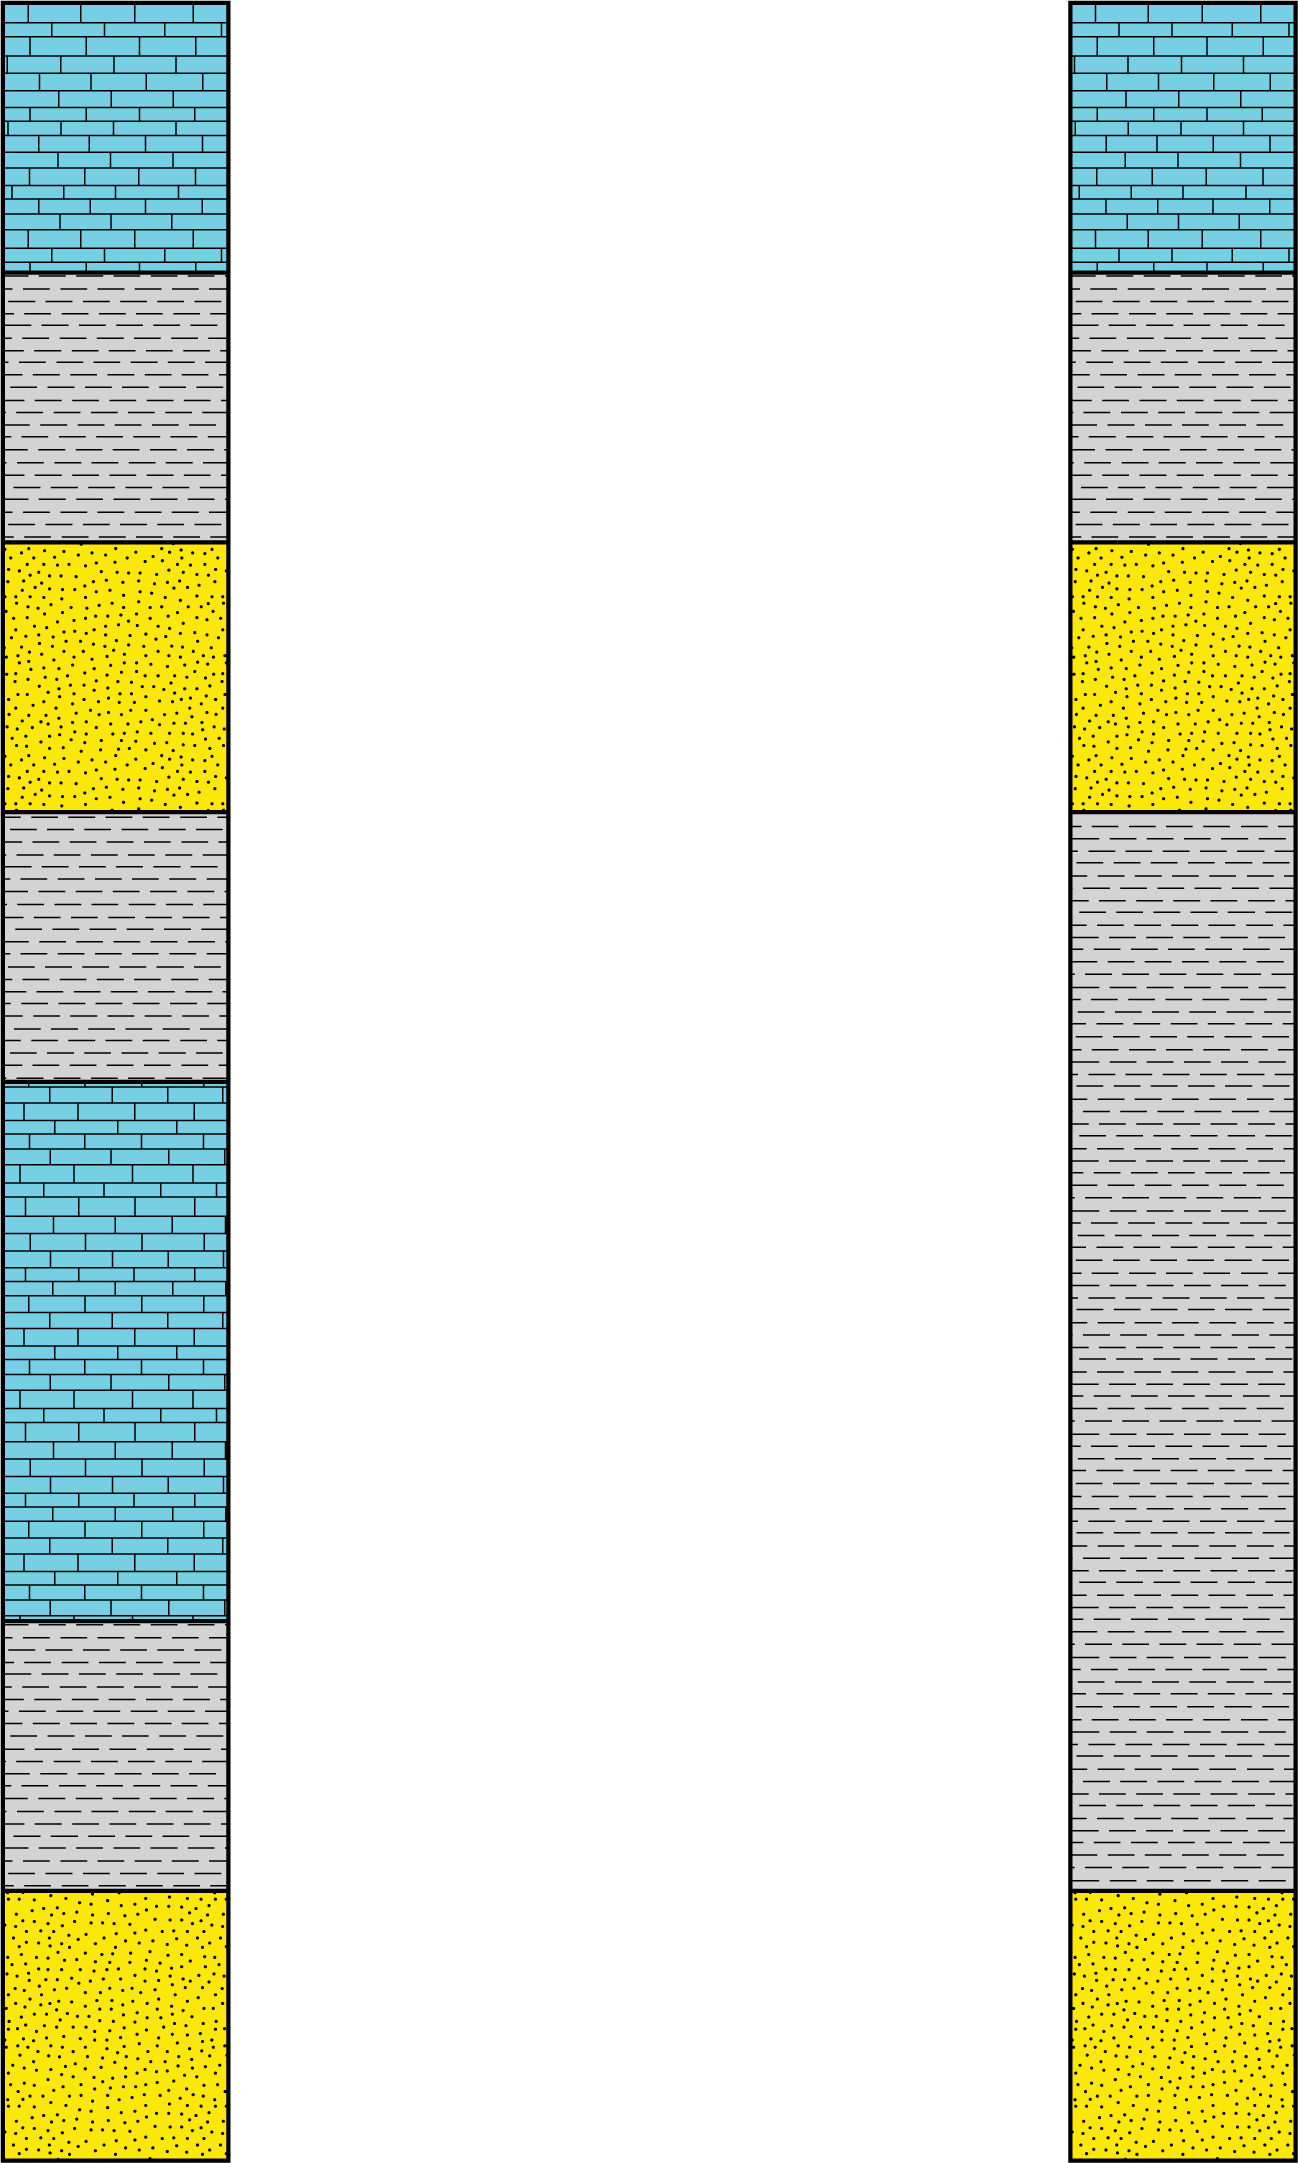 Two stratigraphic columns for the correlation part of Exercise 5.3.